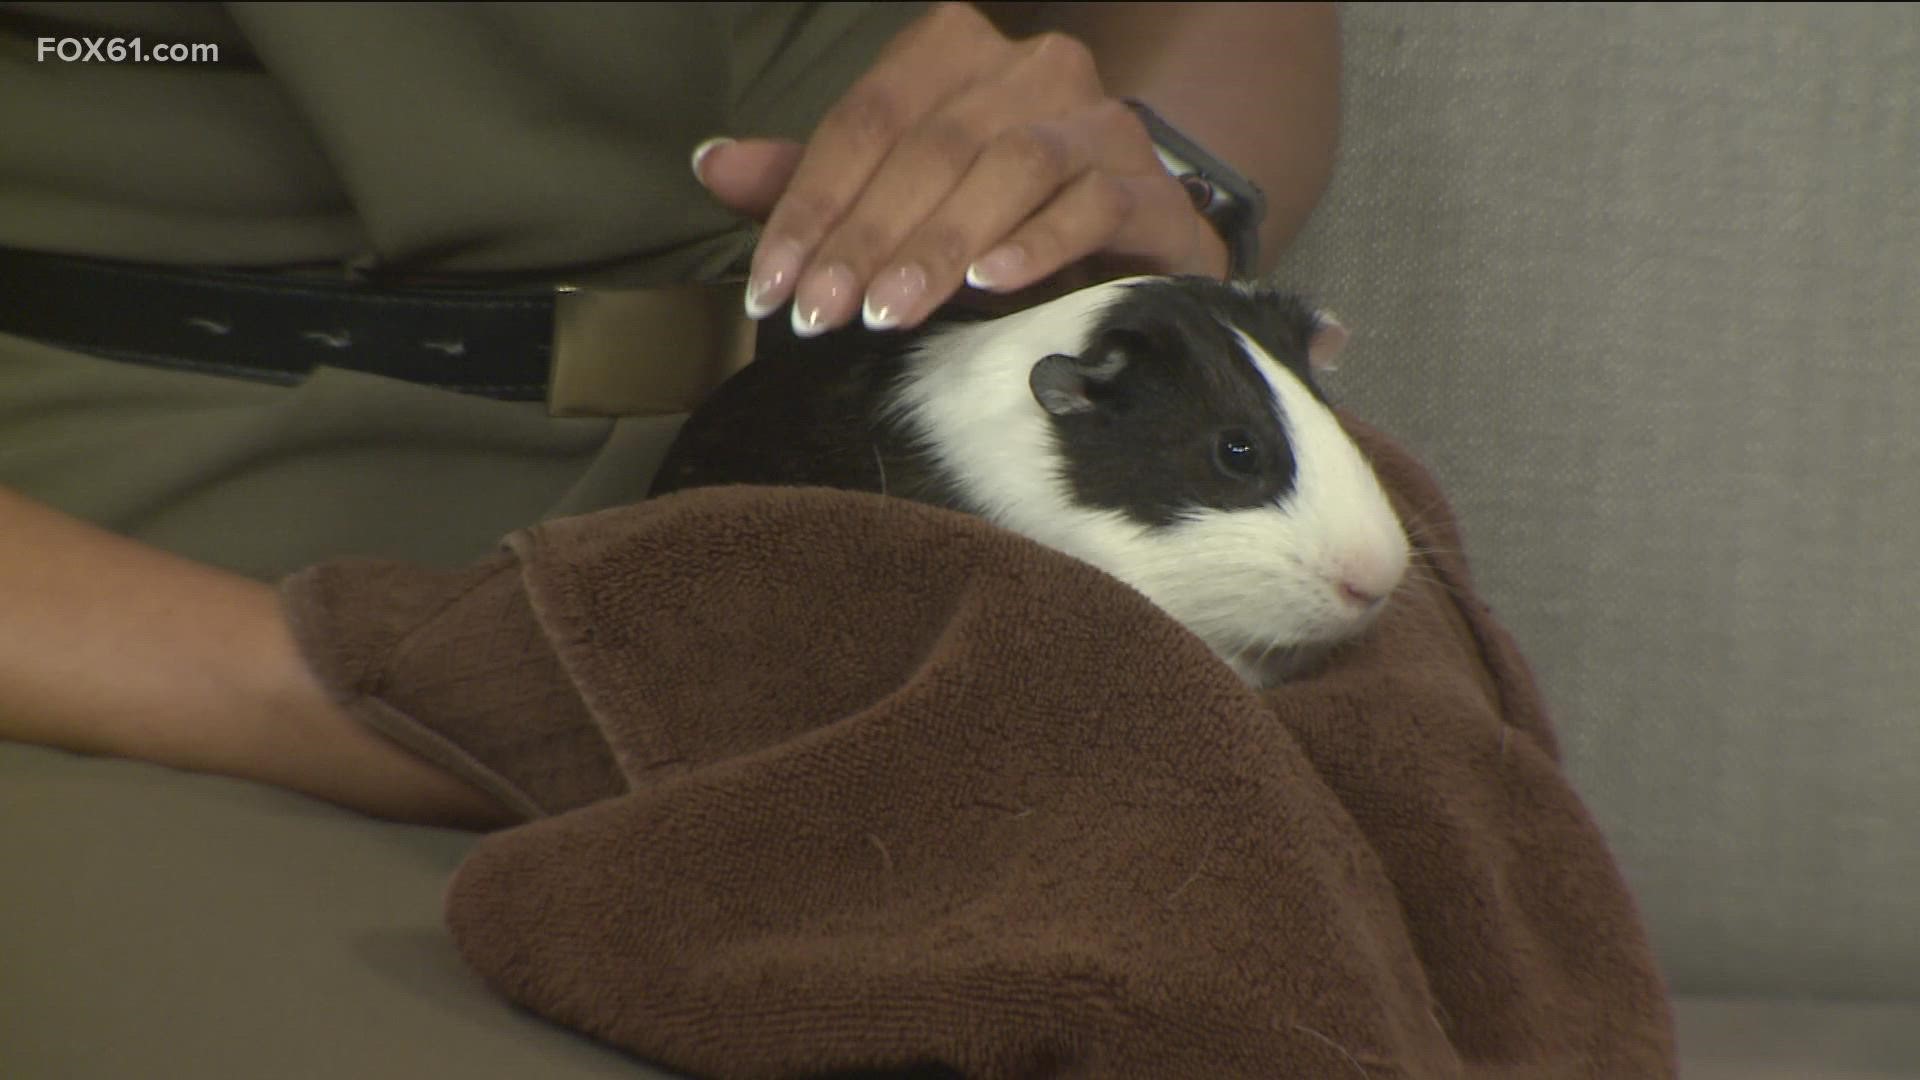 Oreo the Guinea pig hopes to find a forever home. Oreo is adoptable from the Connecticut Humane Society.